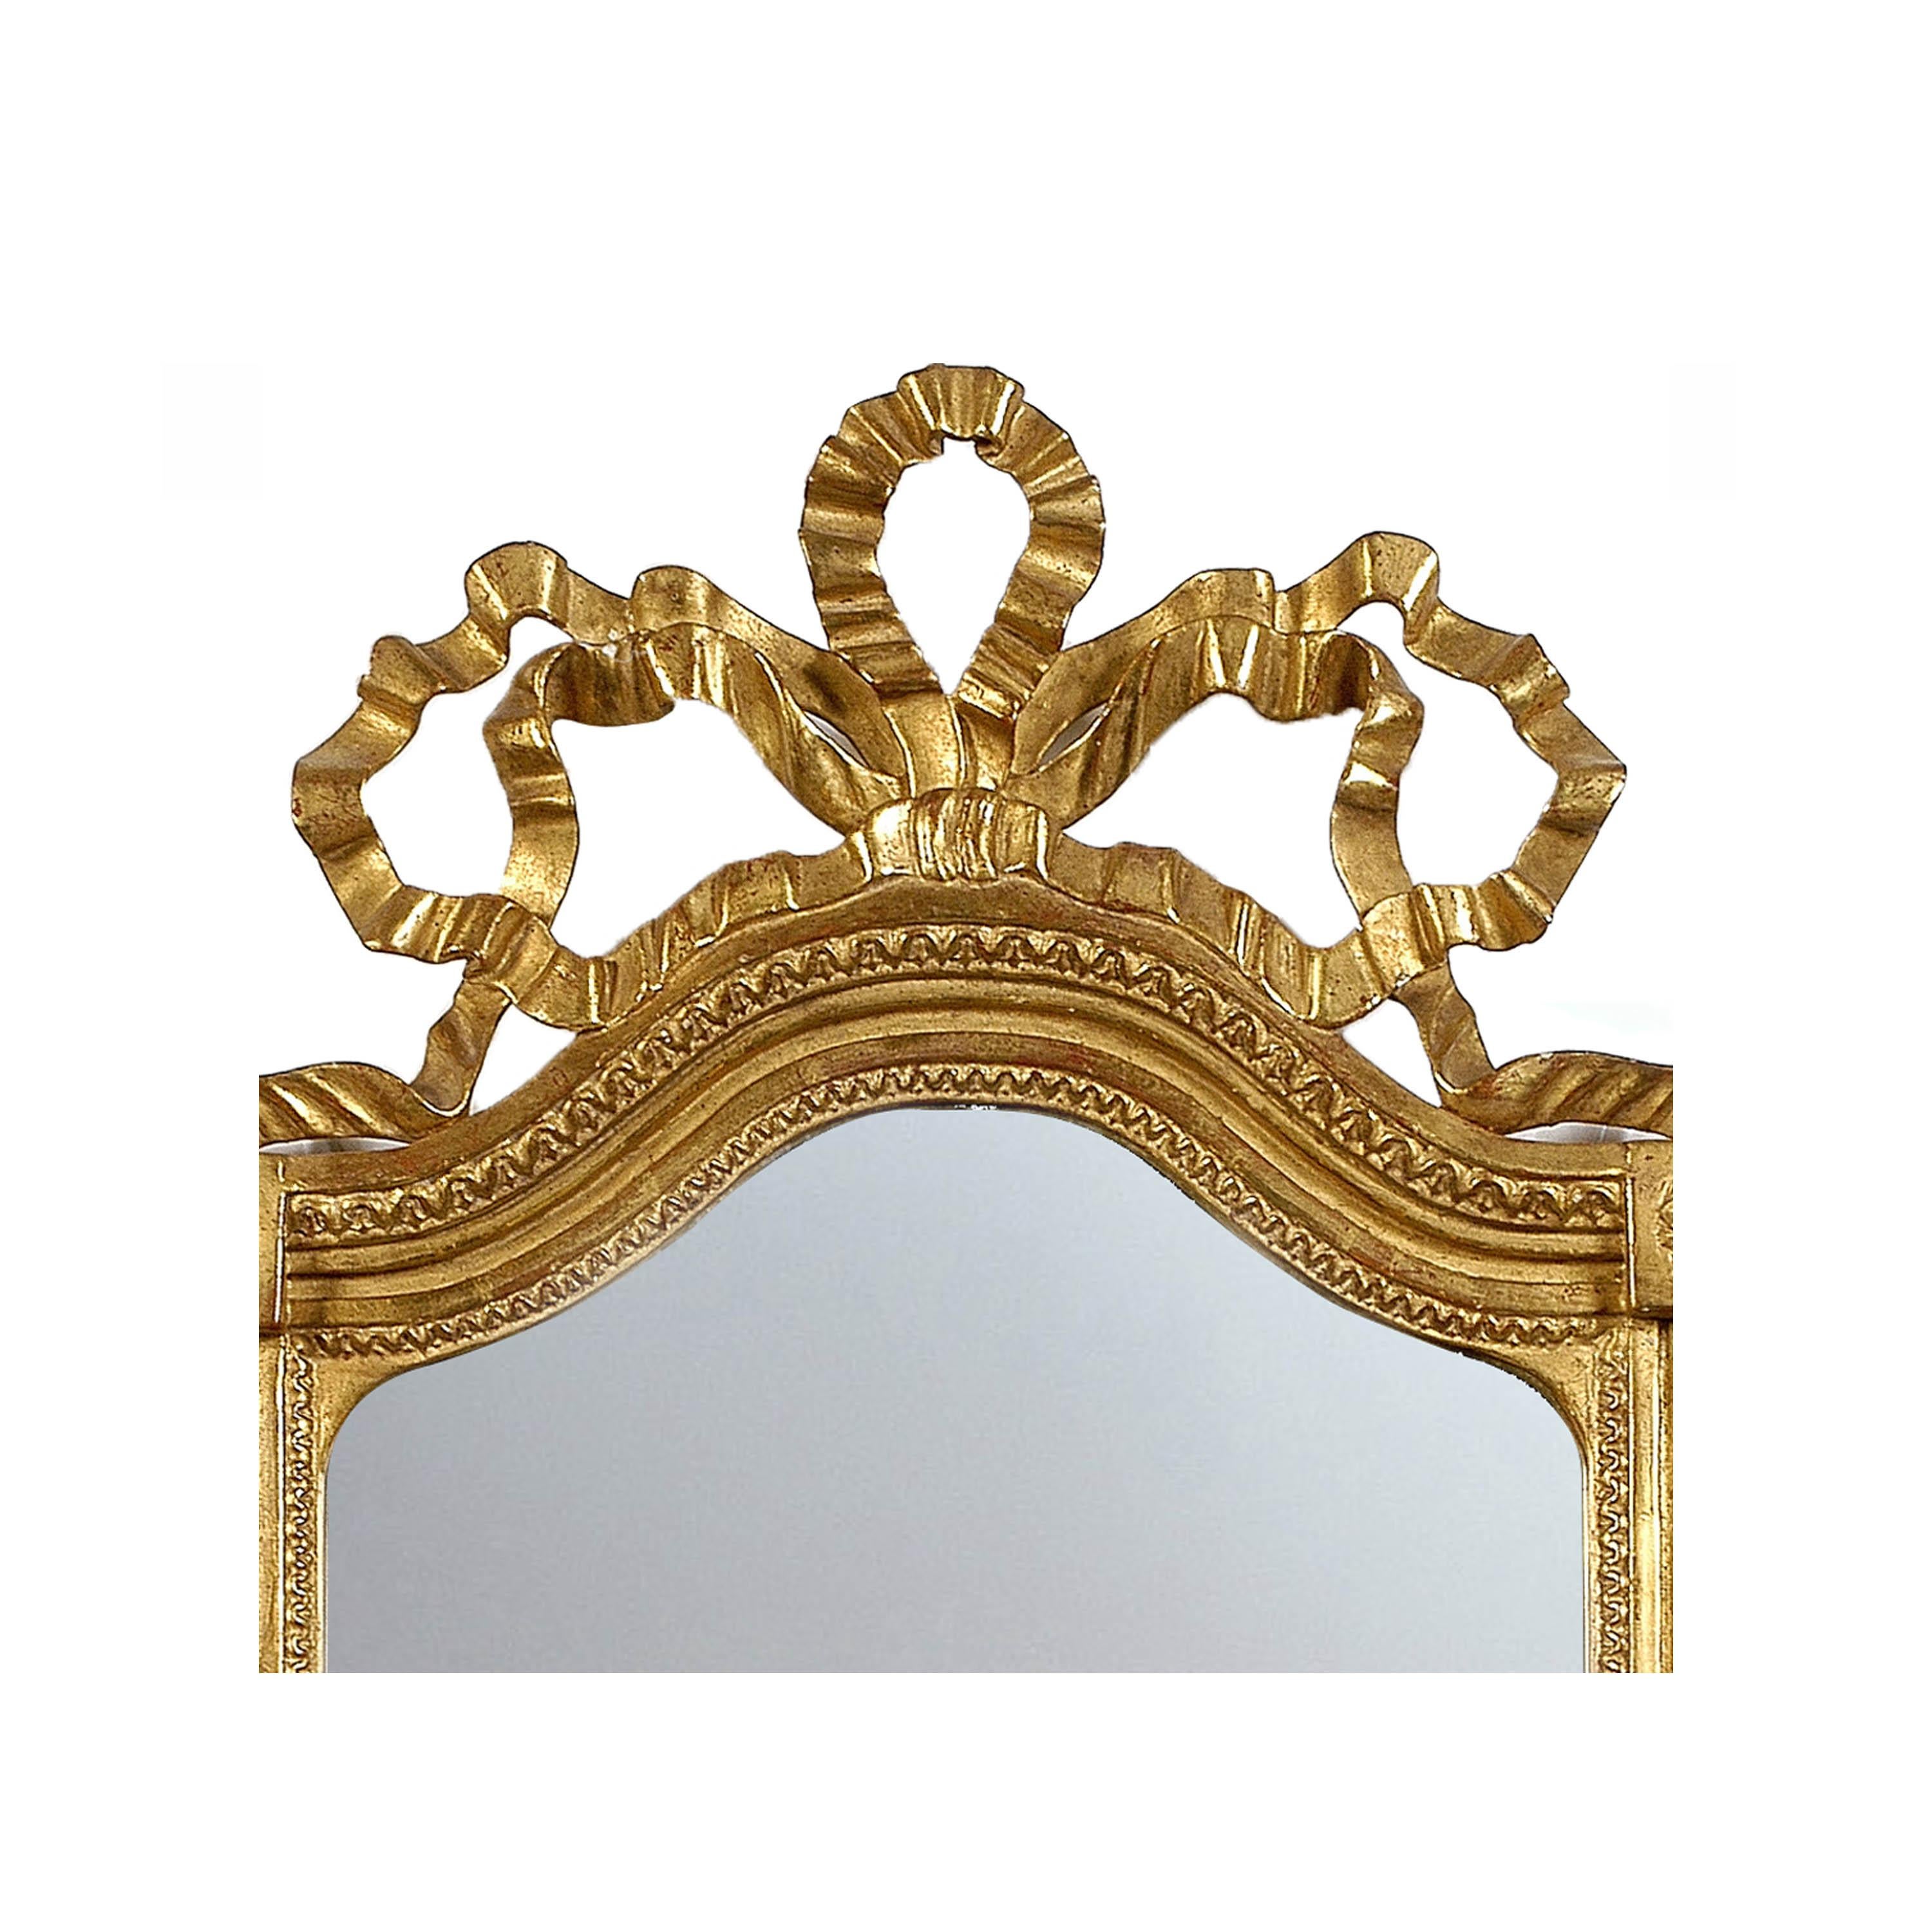 Neoclassical Regency style handcrafted mirror. Rectangular and carved wooden structure with gold foil finished. Spain, 1970.